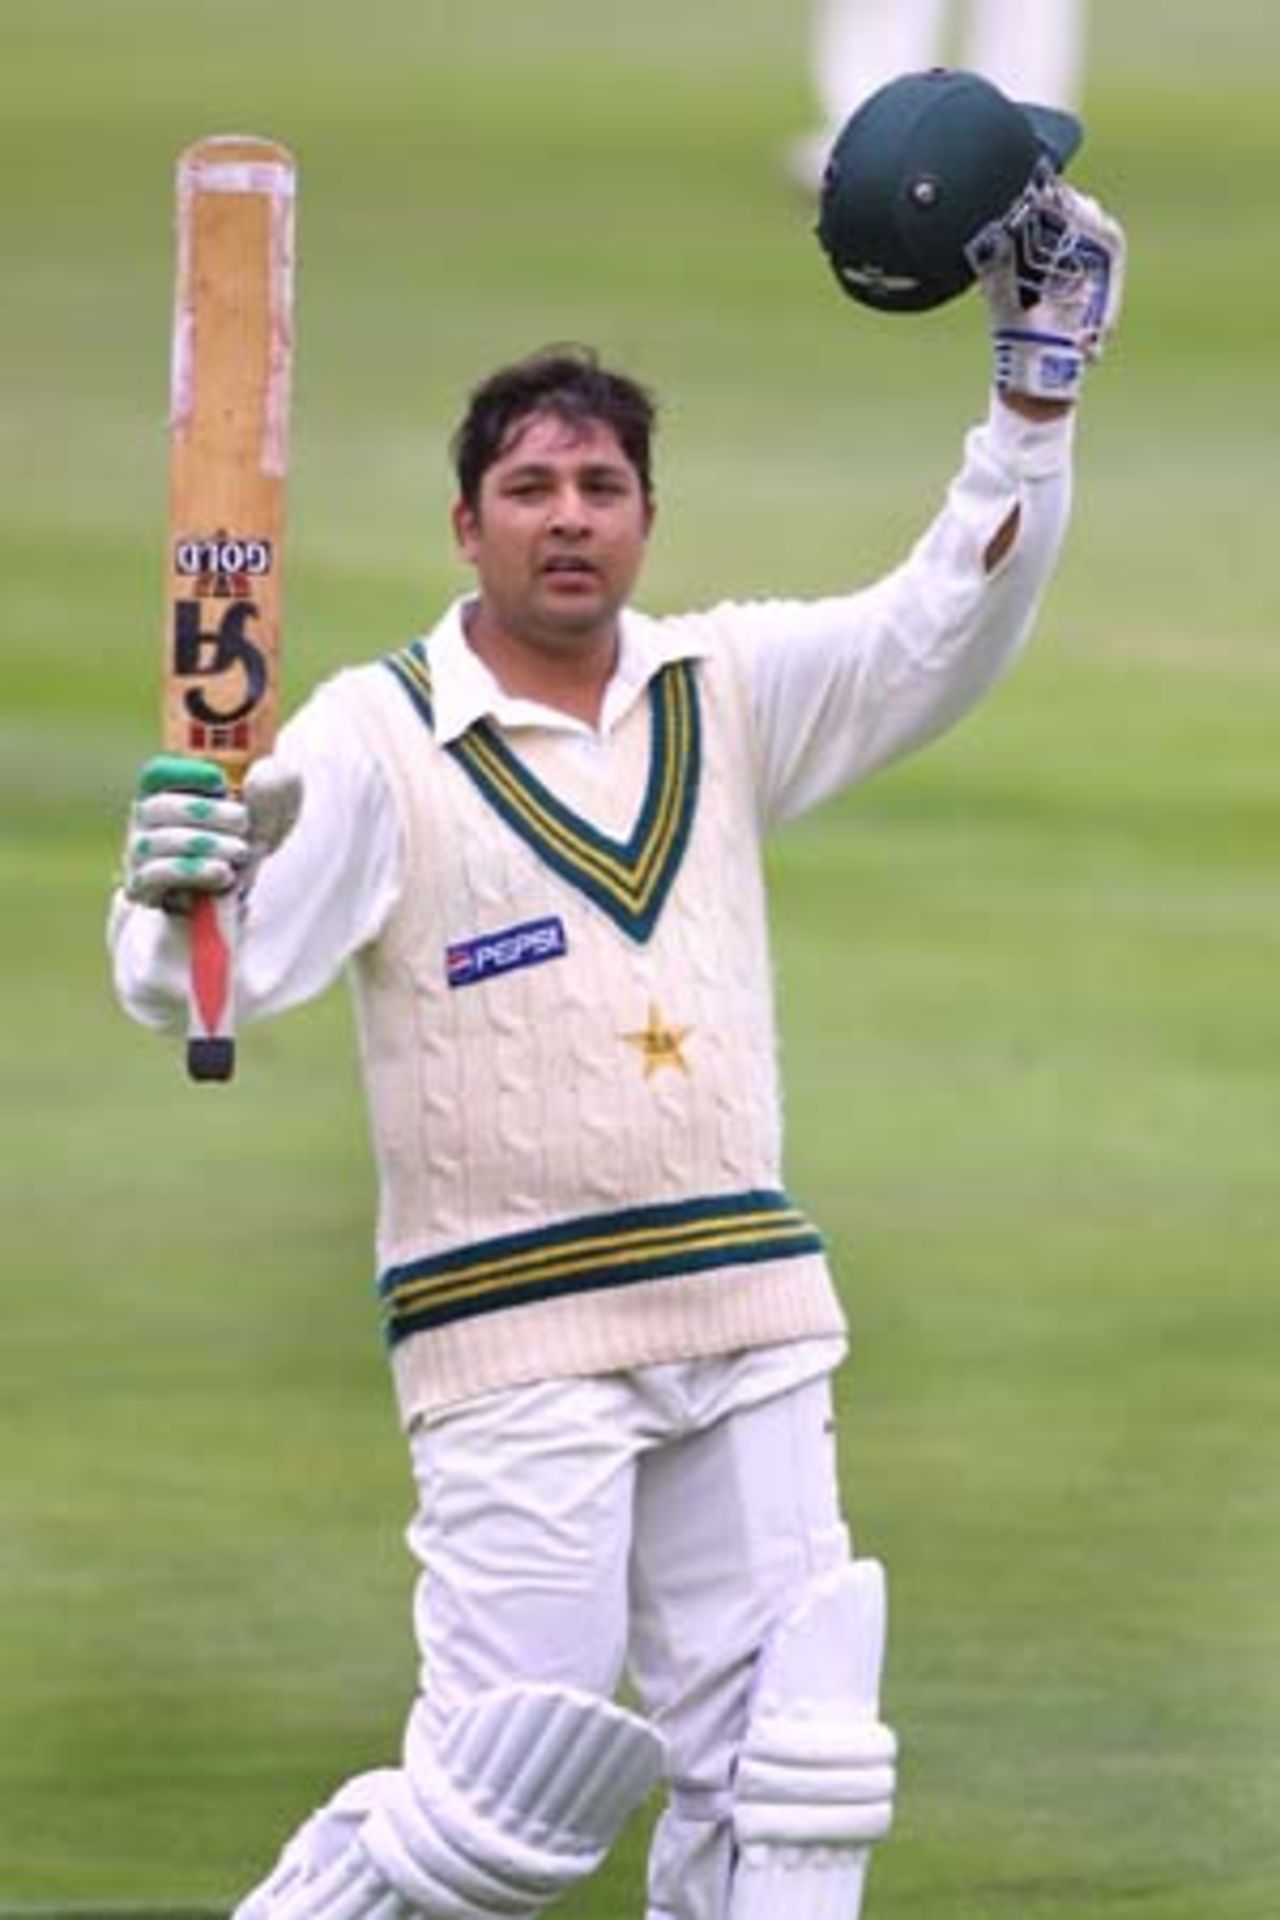 Pakistan batsman Inzamam-ul-Haq raises his bat and his helmet in celebration of reaching his 13th Test century. Inzamam went on to score 130 in his first innings. 2nd Test: New Zealand v Pakistan at Jade Stadium, Christchurch, 15-19 March 2001 (17 March 2001).